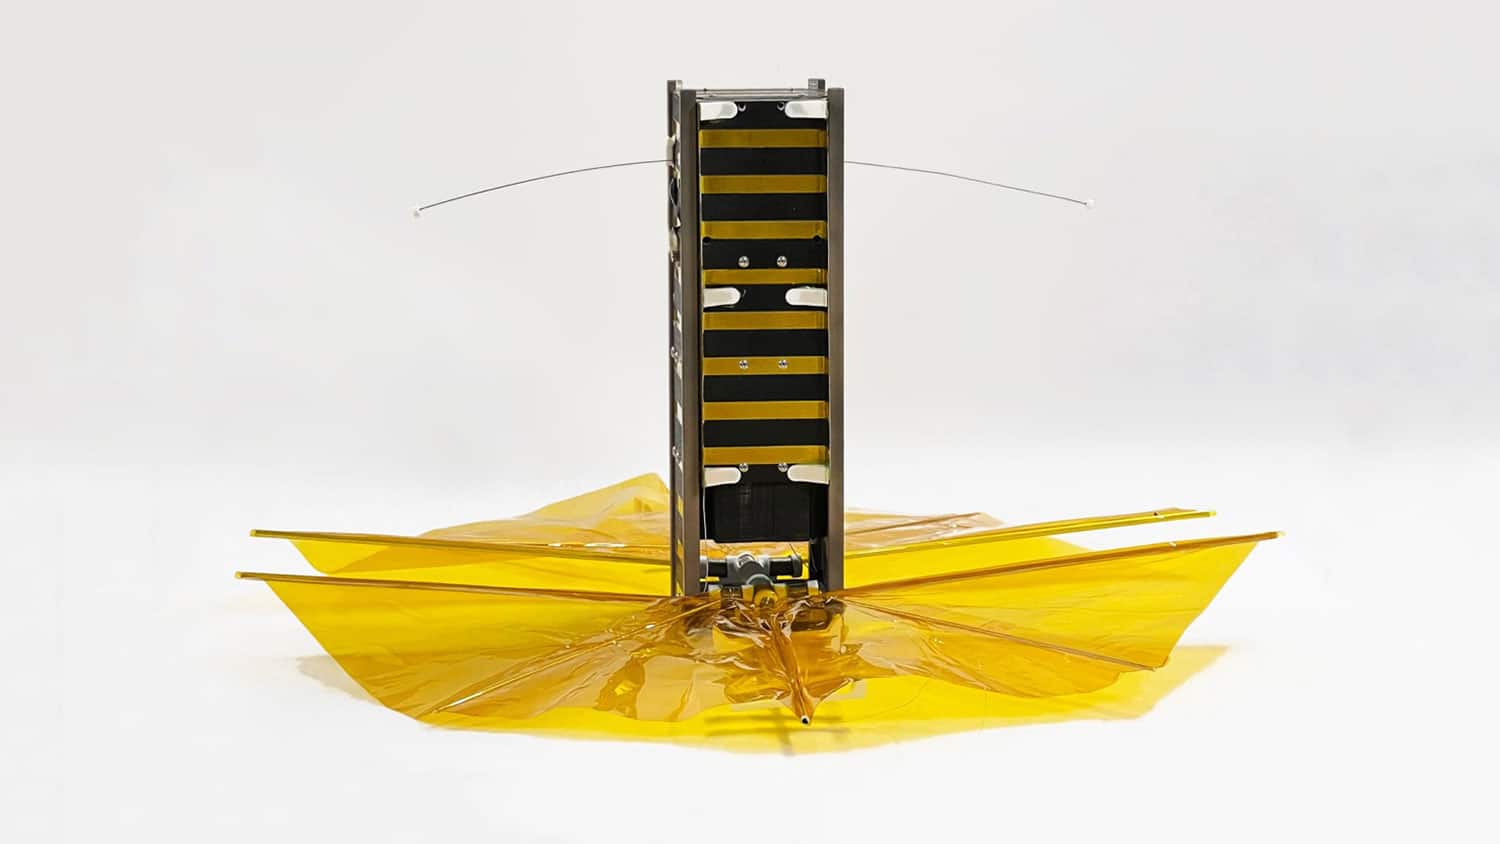 SBUDNIC, a bread-loaf-sized cube satellite with a drag sail made from Kapton polyimide film.